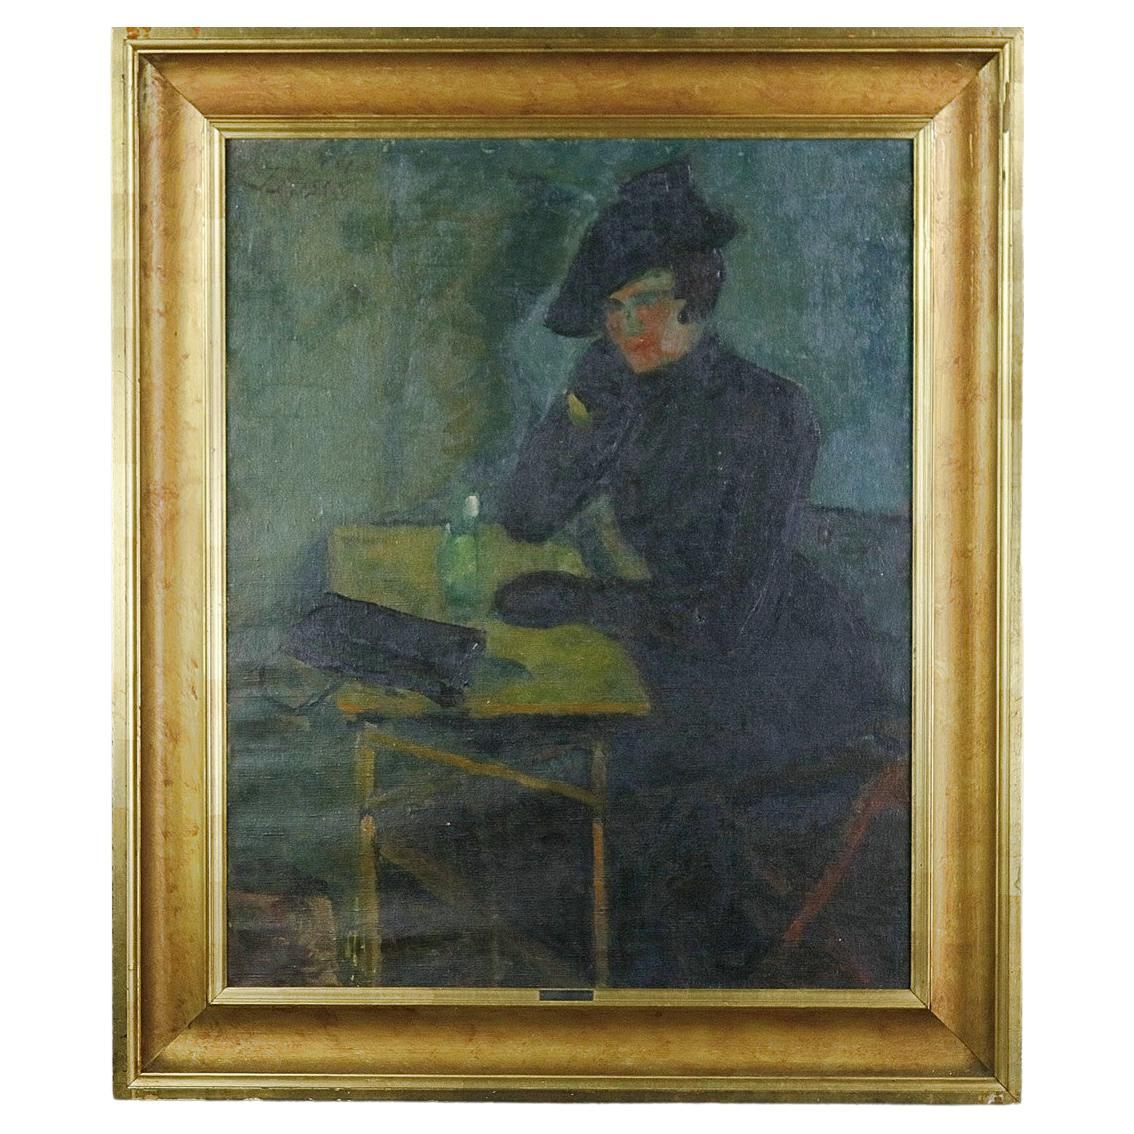 Circa 1910 Danish Oil Painting on Canvas by Artist Immanuel Ibsen '1887-1944'